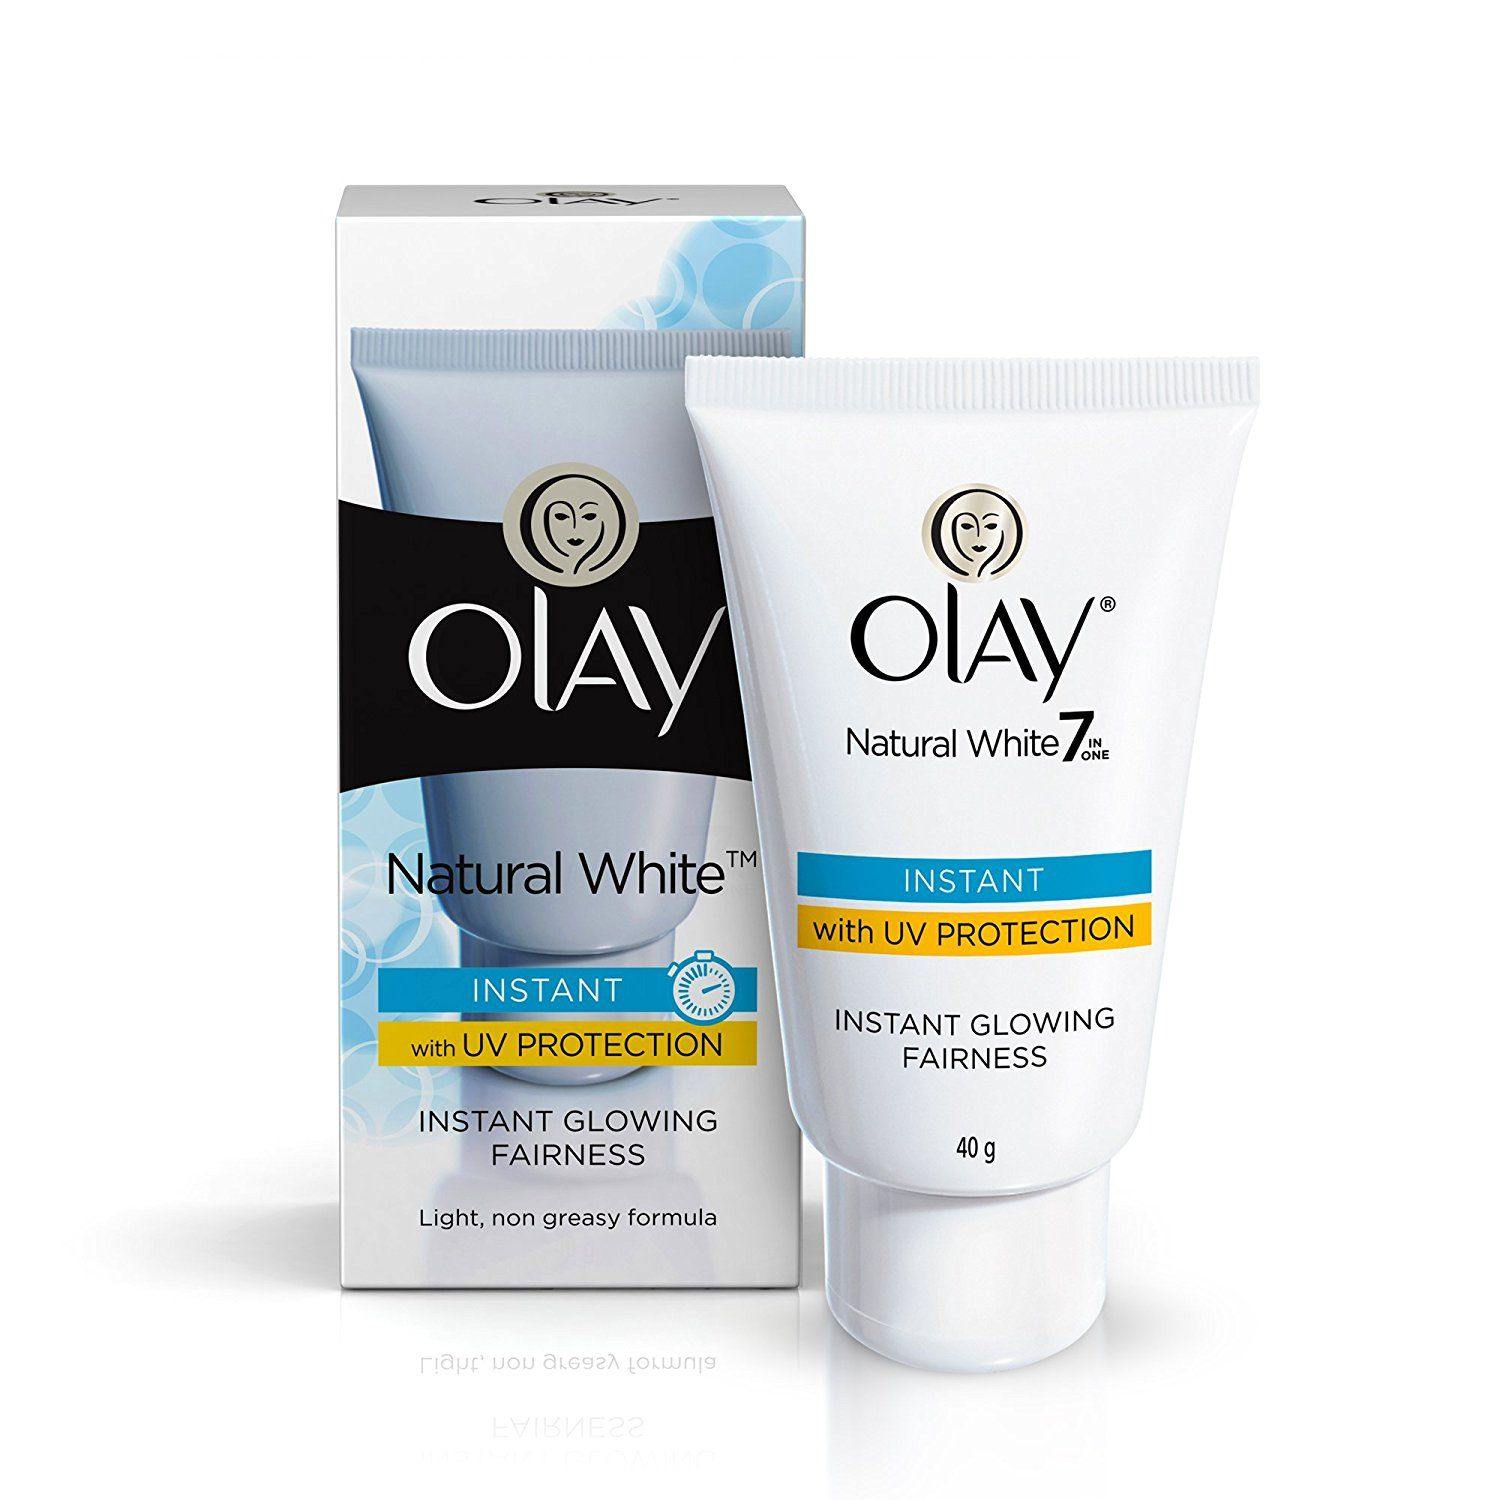 Olay Natural White 7 in 1 Instant Glowing Fairness Cream (40gm) - Niram